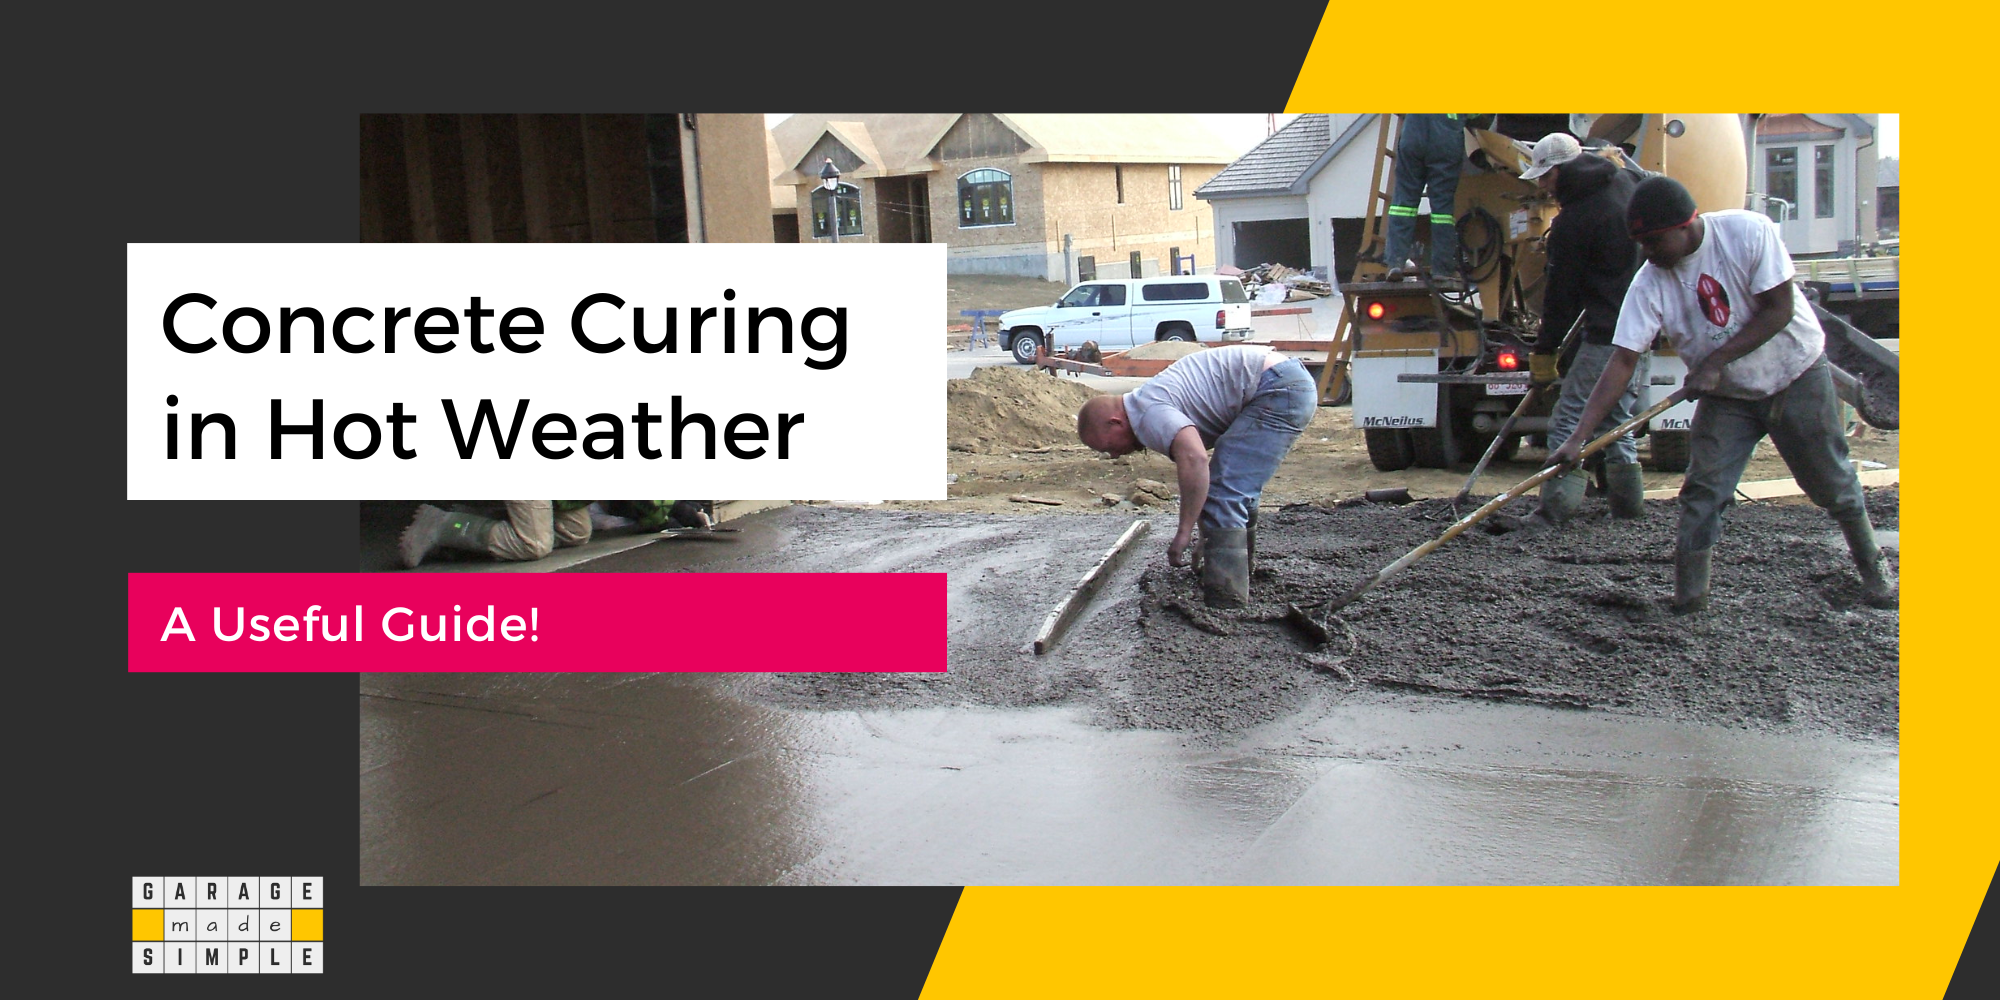 9 Tips for Curing Concrete in Hot Weather: A Useful Guide!